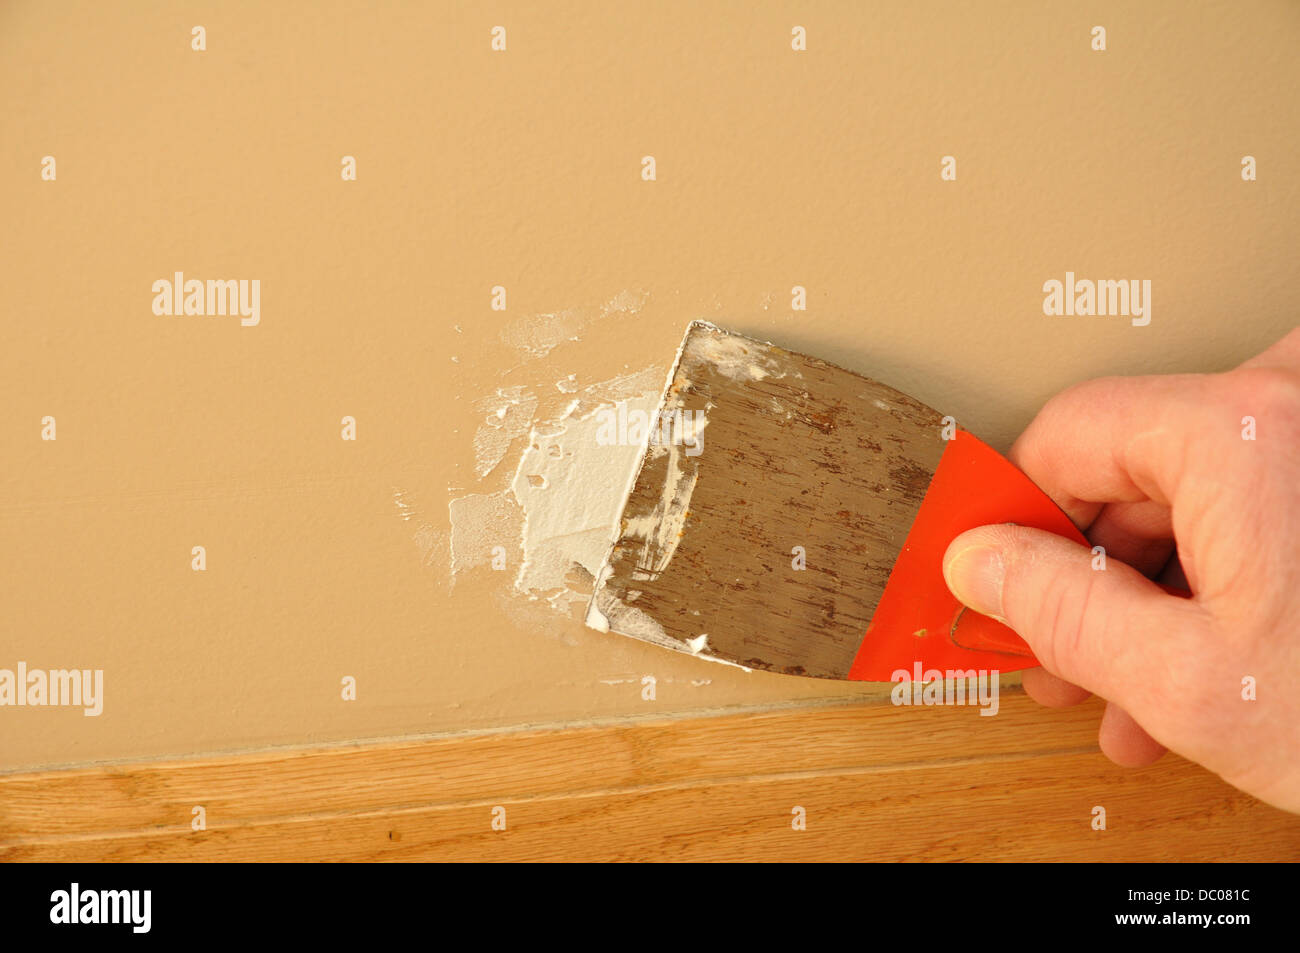 Putty Knife with filler / Pollyfilla / grout / spackling paste repairing a hole in the wall Stock Photo